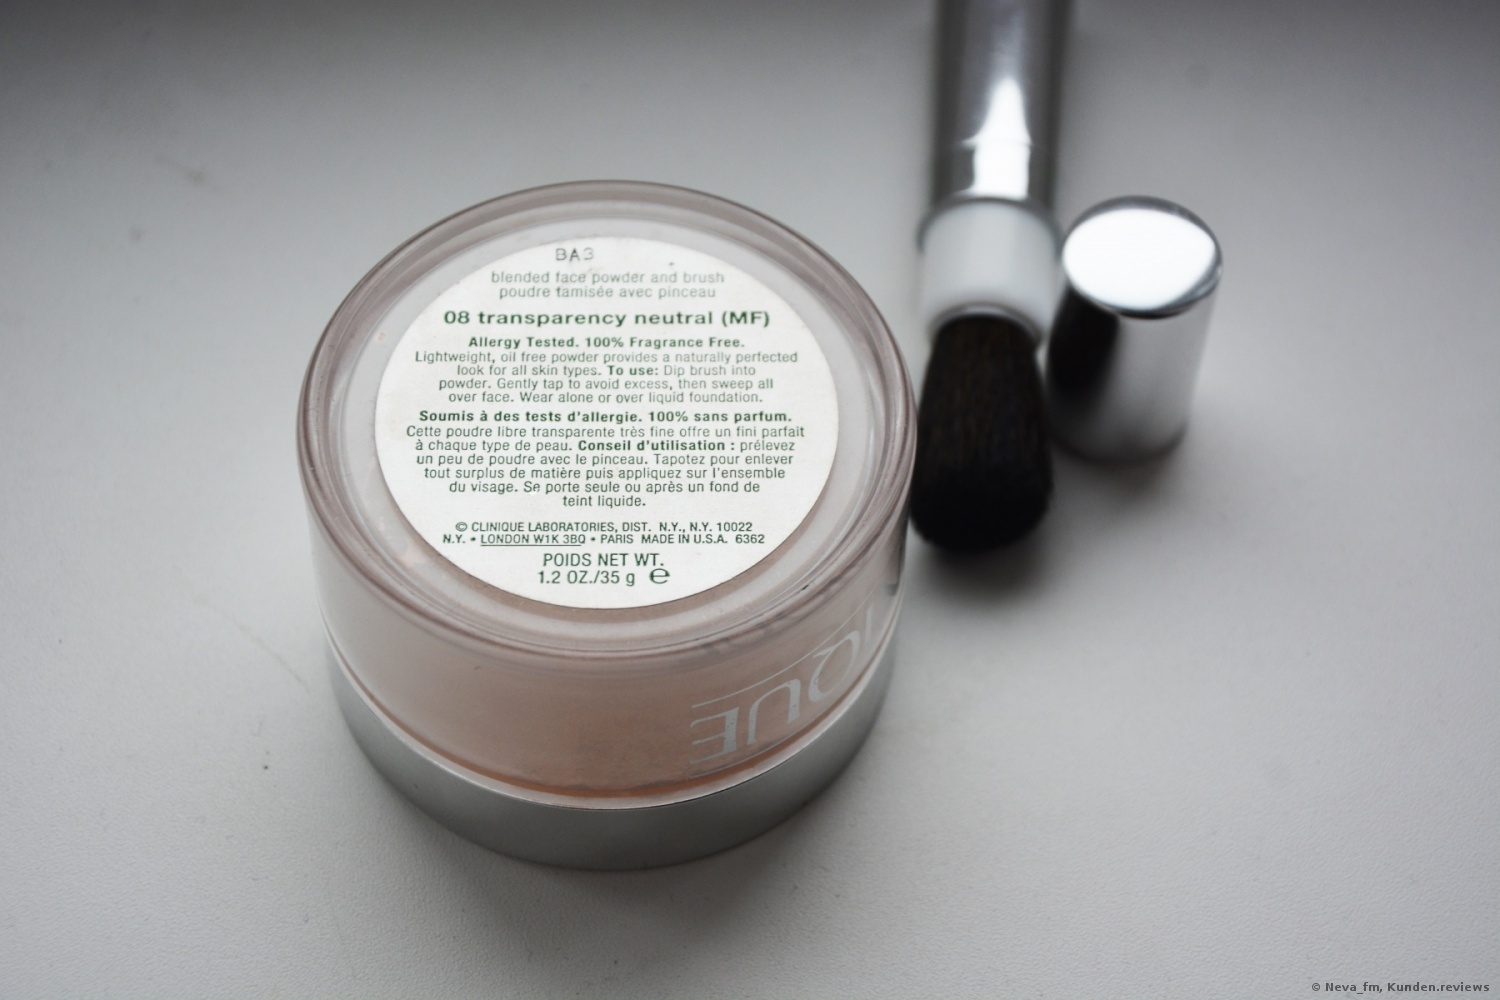 Clinique Puder Blended Face Powder and Brush